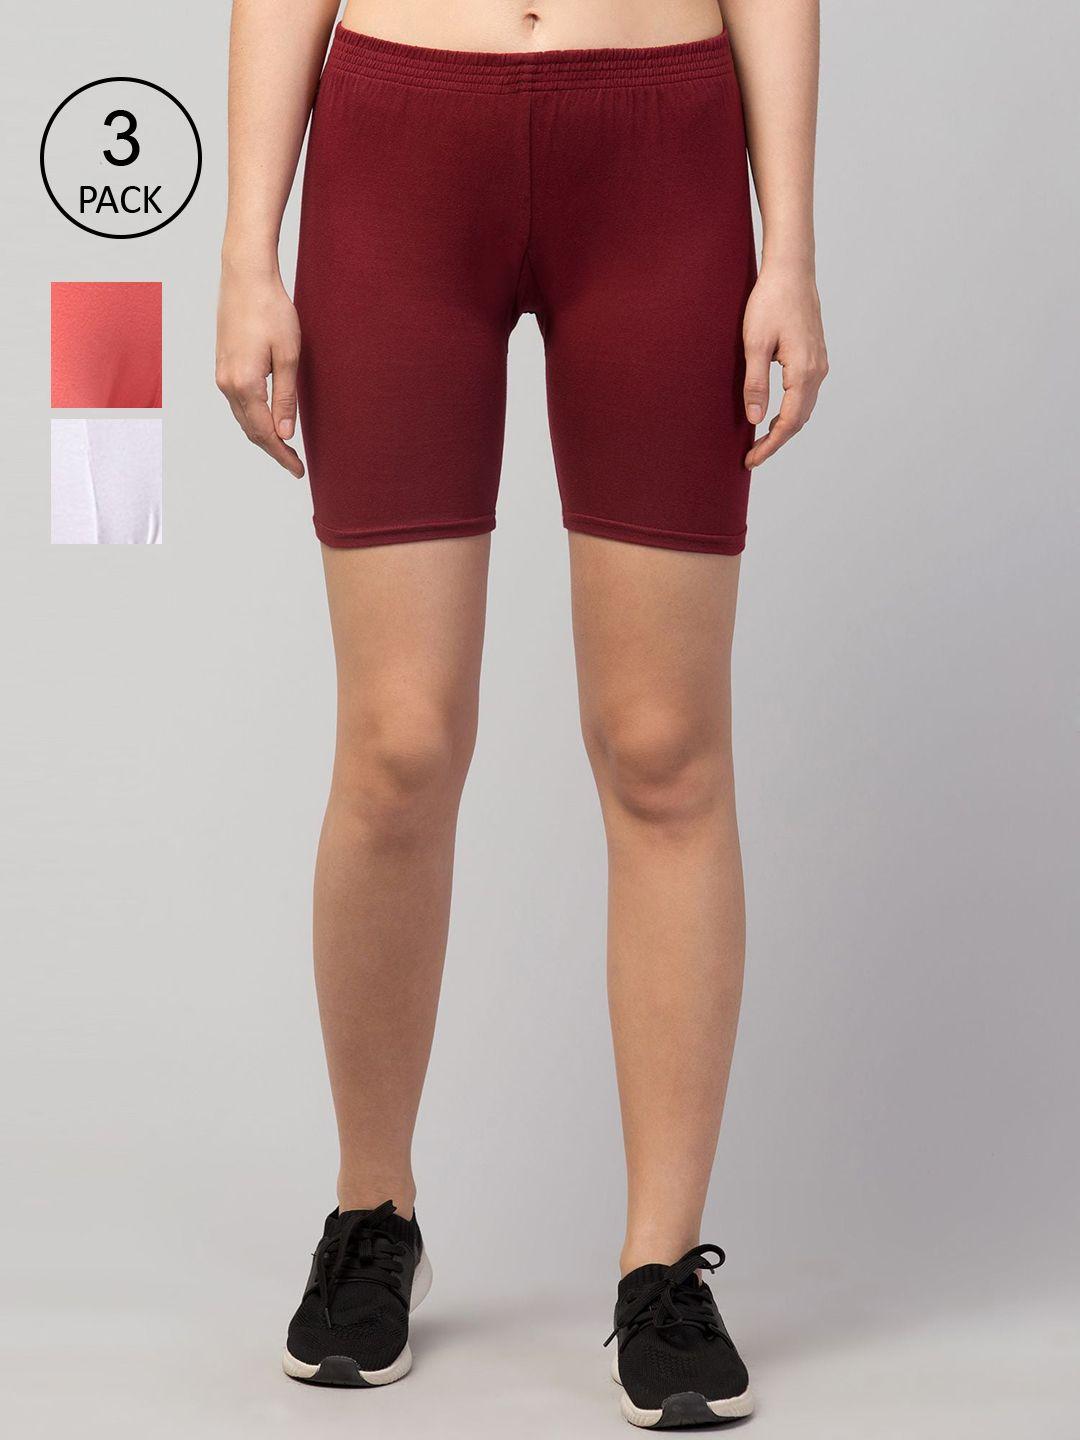 apraa & parma women maroon slim fit cycling sports shorts pack of 3